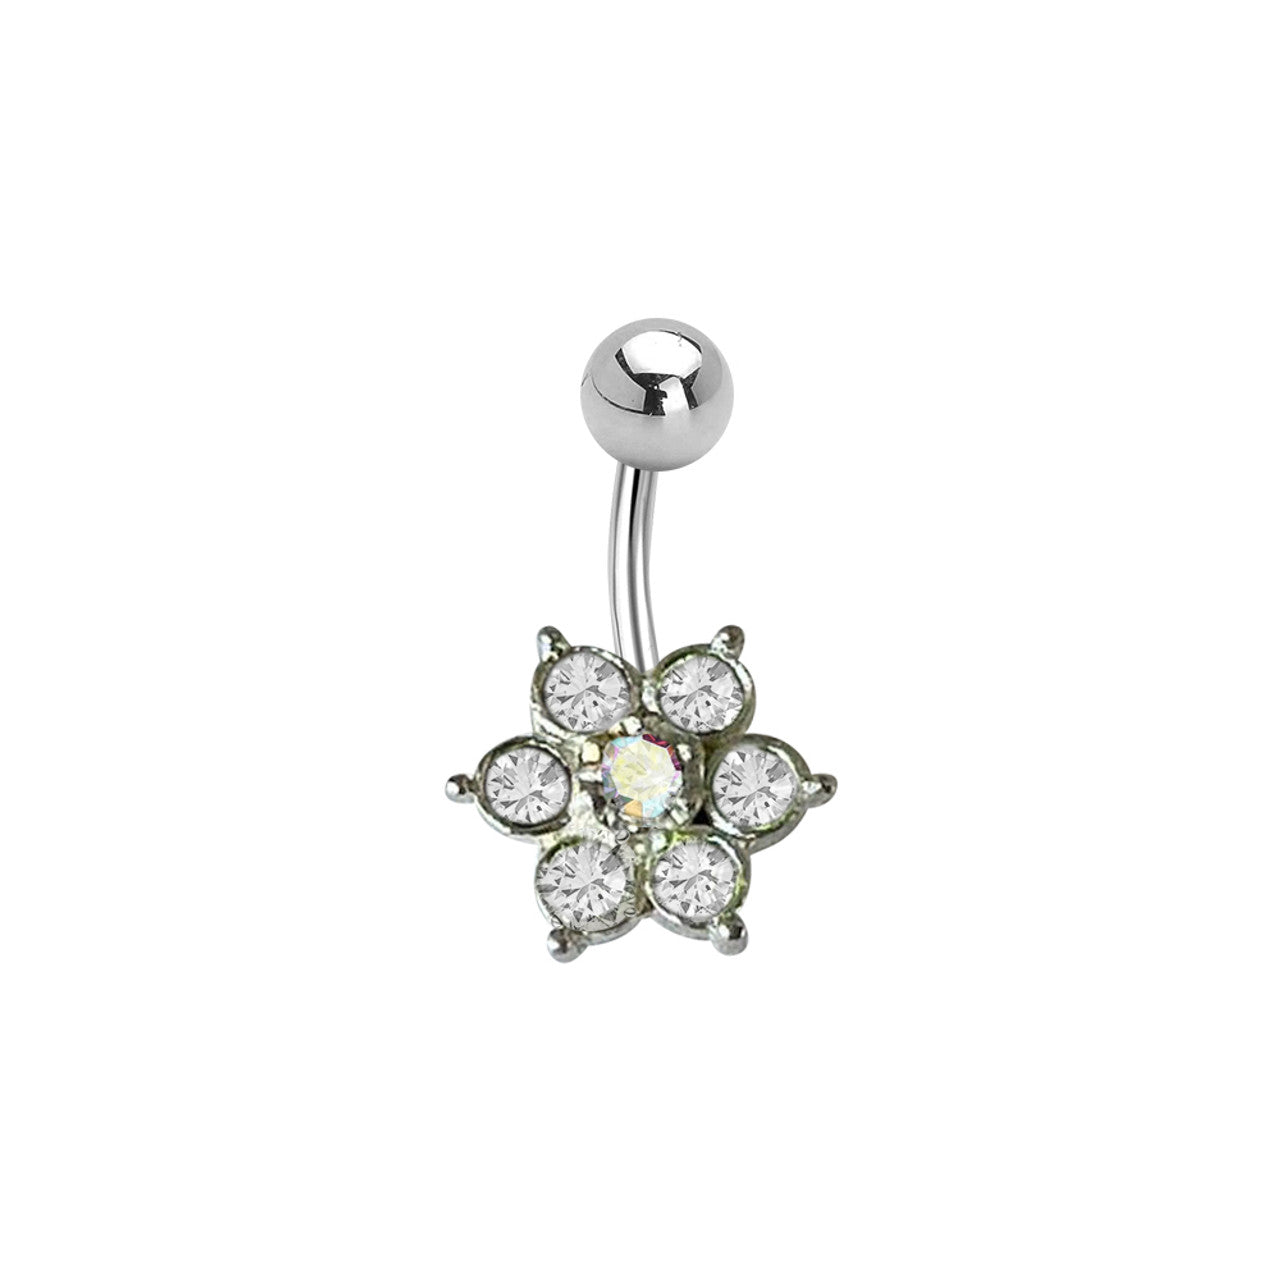 Surgical Steel Belly Ring 14 Gauge 7/16" (11MM) With CZ Gems